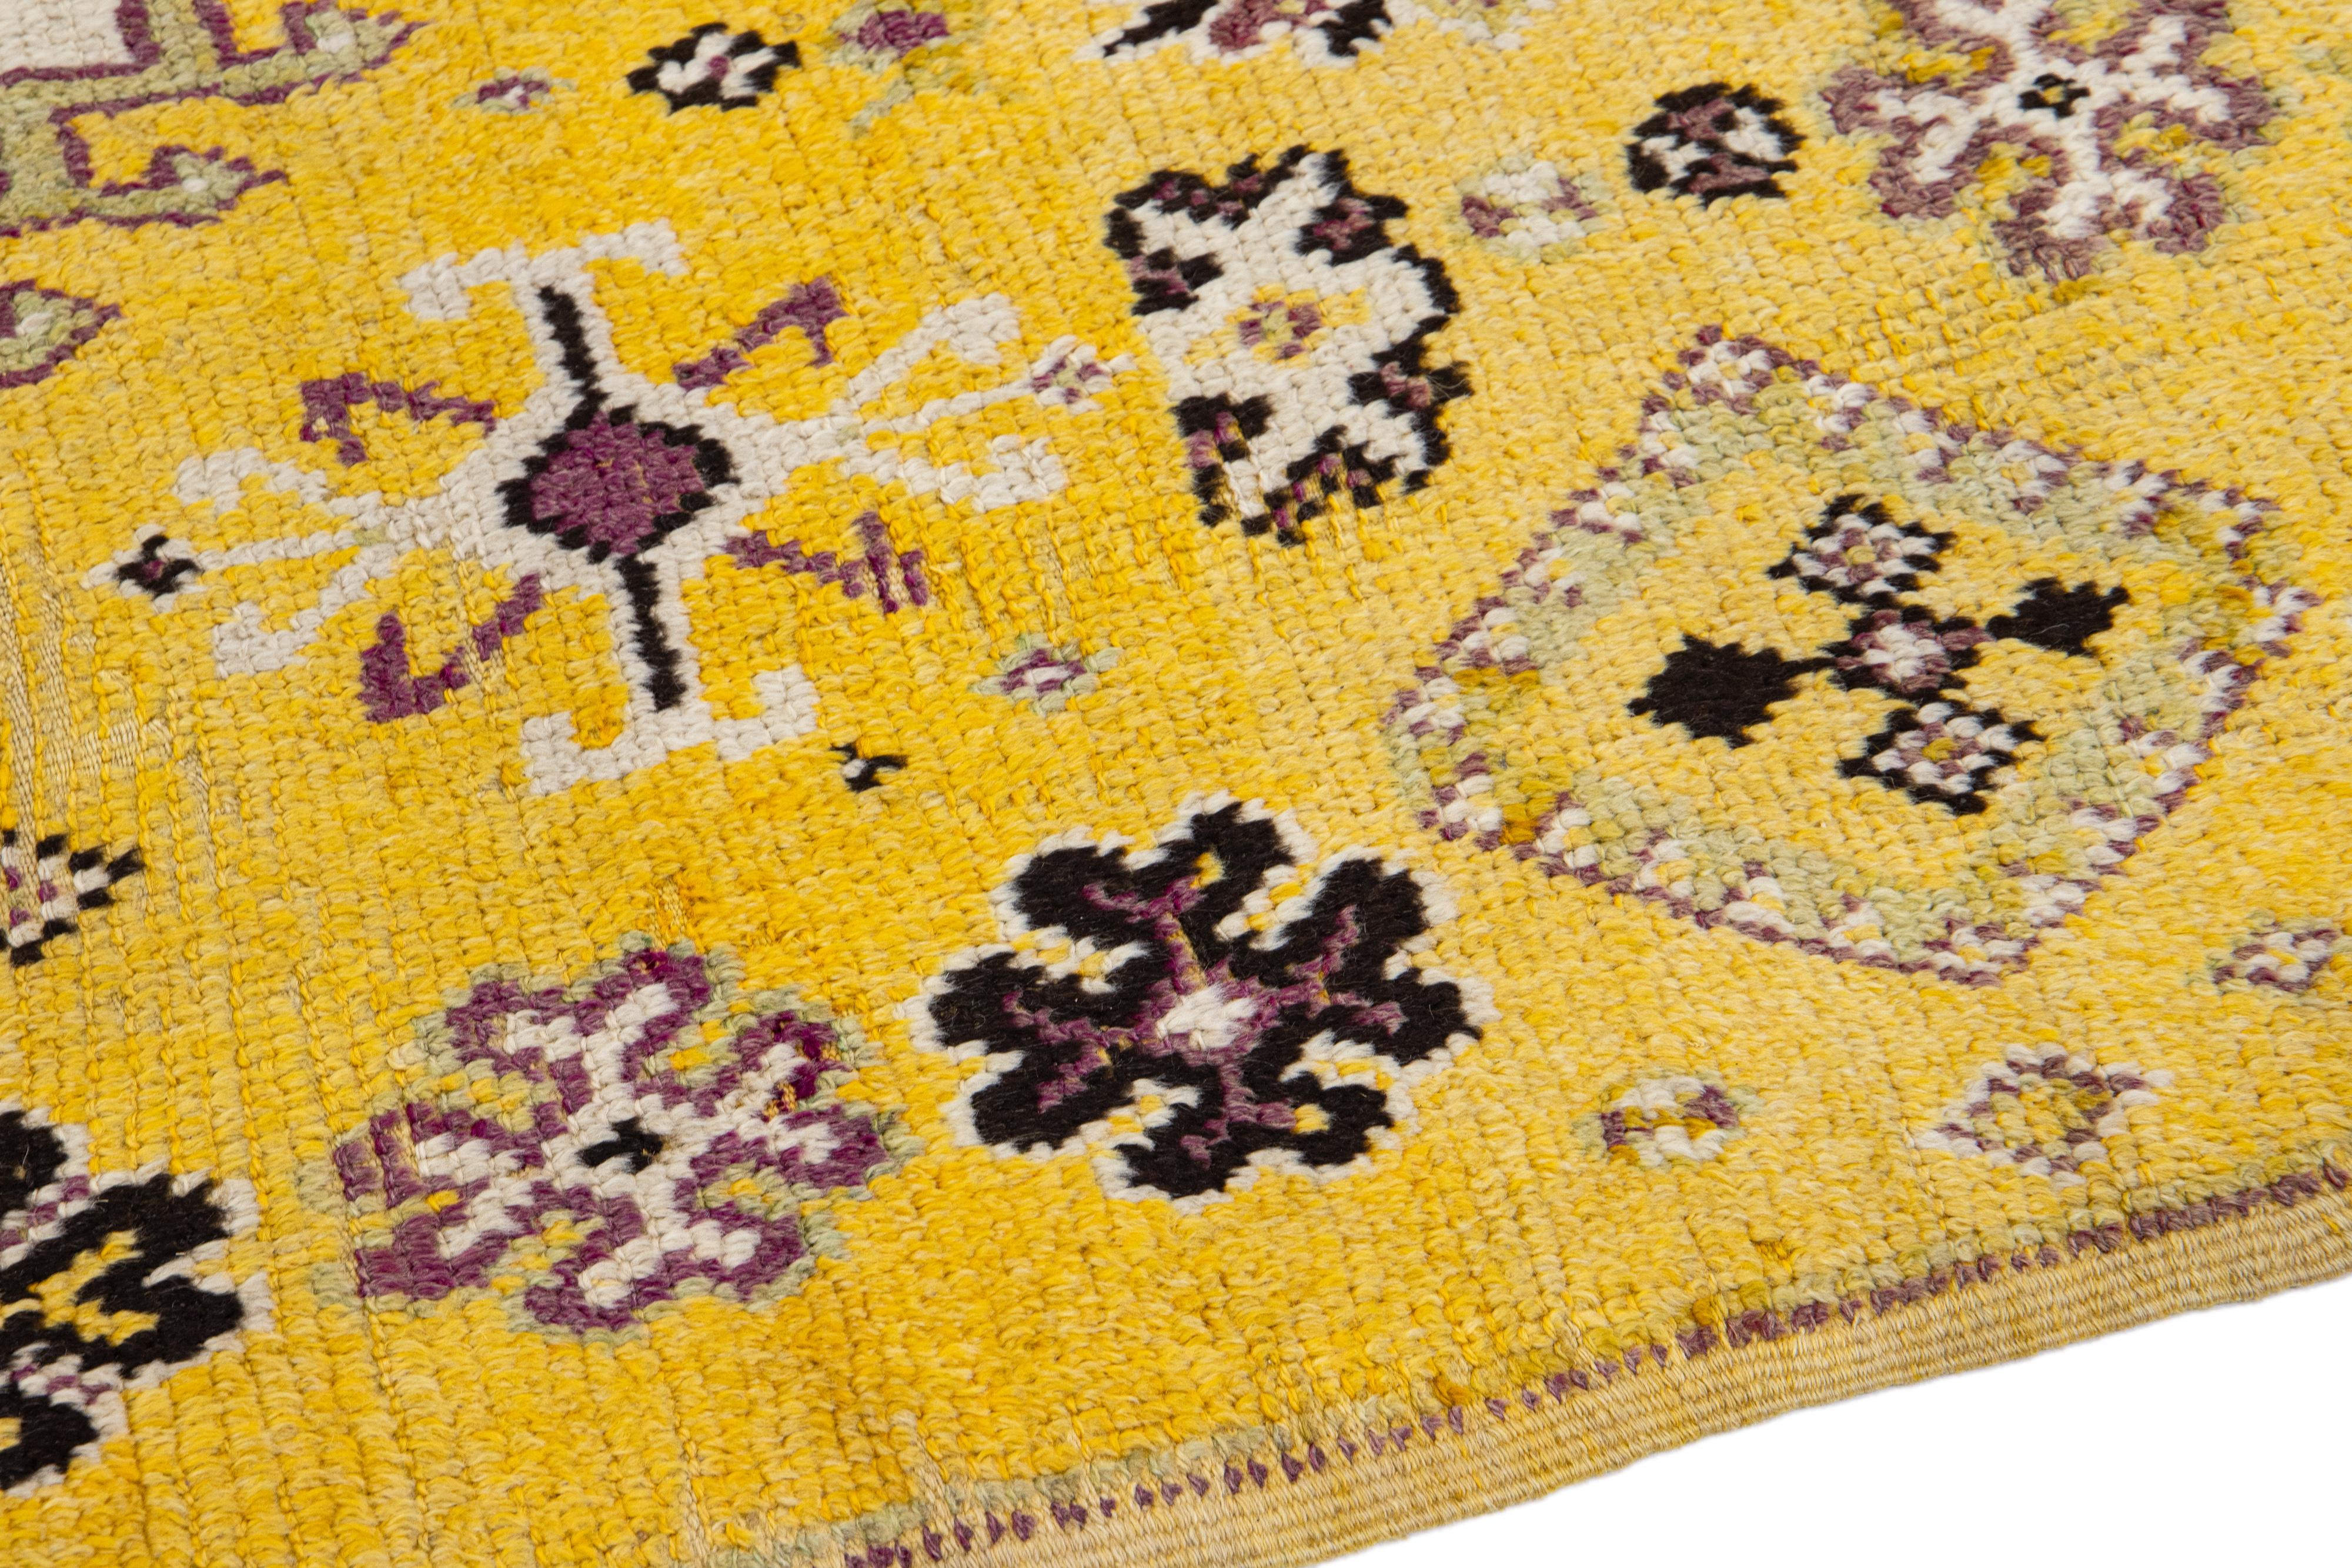 Vintage Moroccan Yellow Handmade Tribal Designed Wool Rug In Excellent Condition For Sale In Norwalk, CT